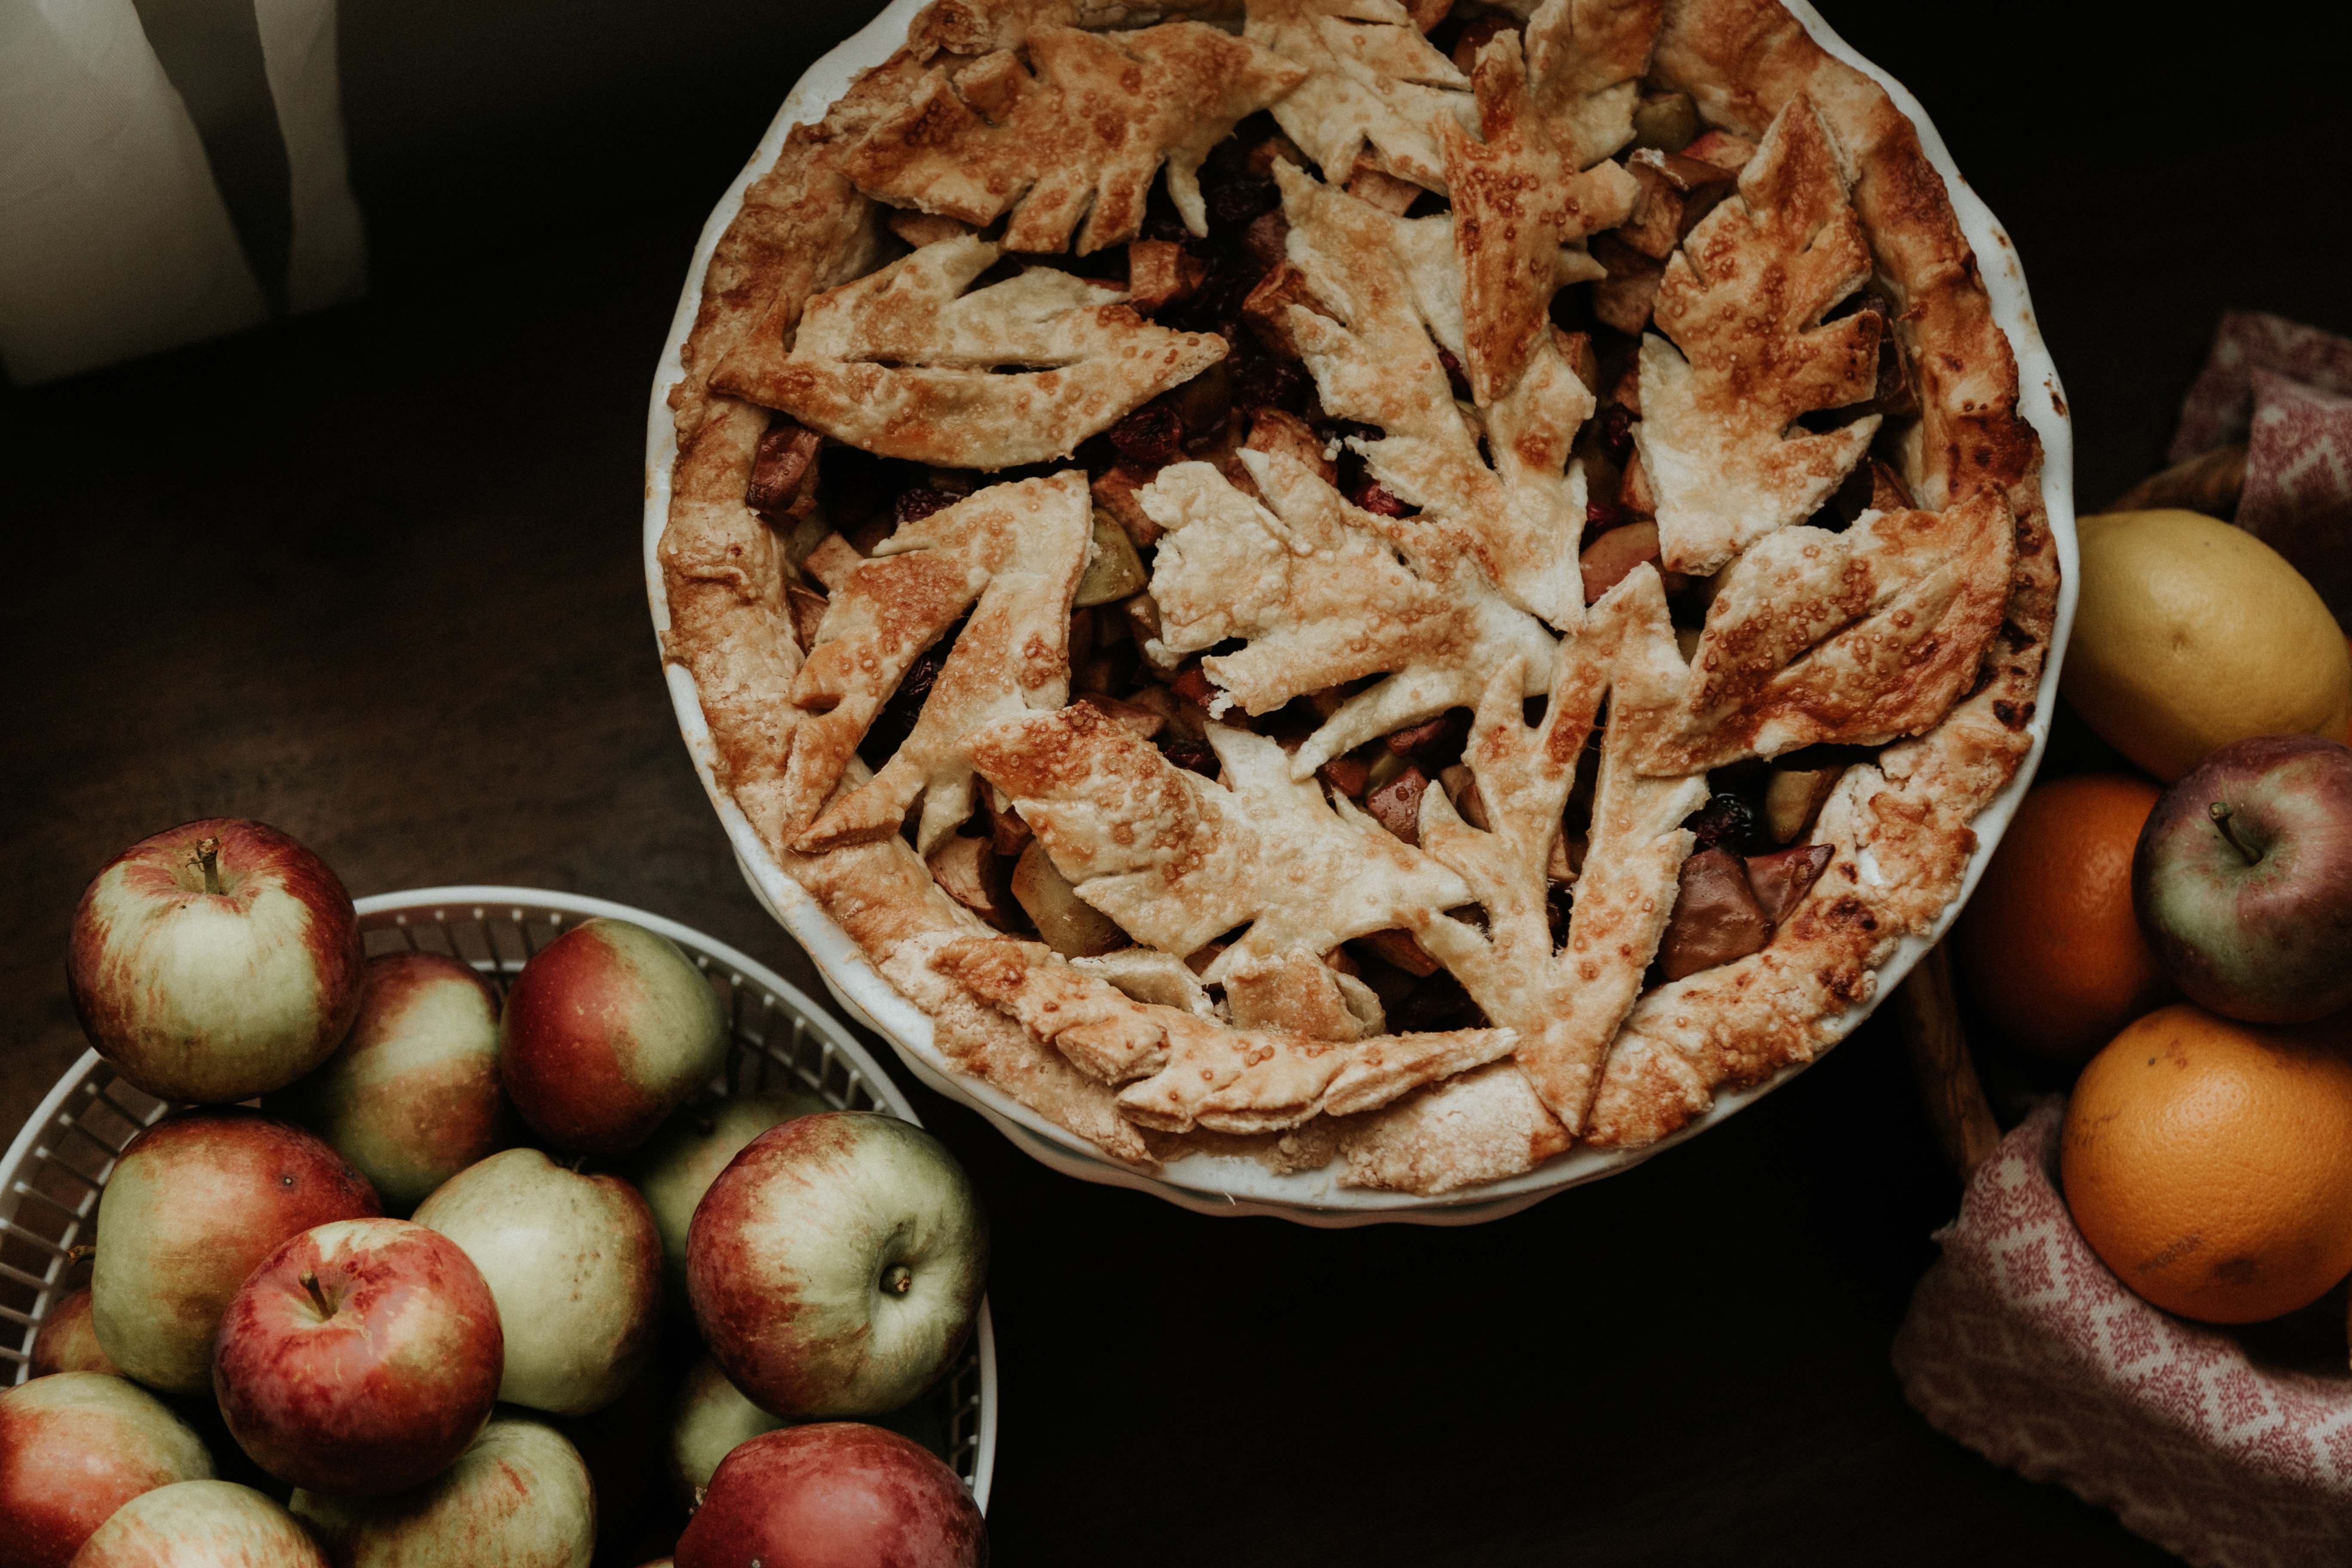 Learn How to Make Apple Pie - Recipe, Ingredients, and More!